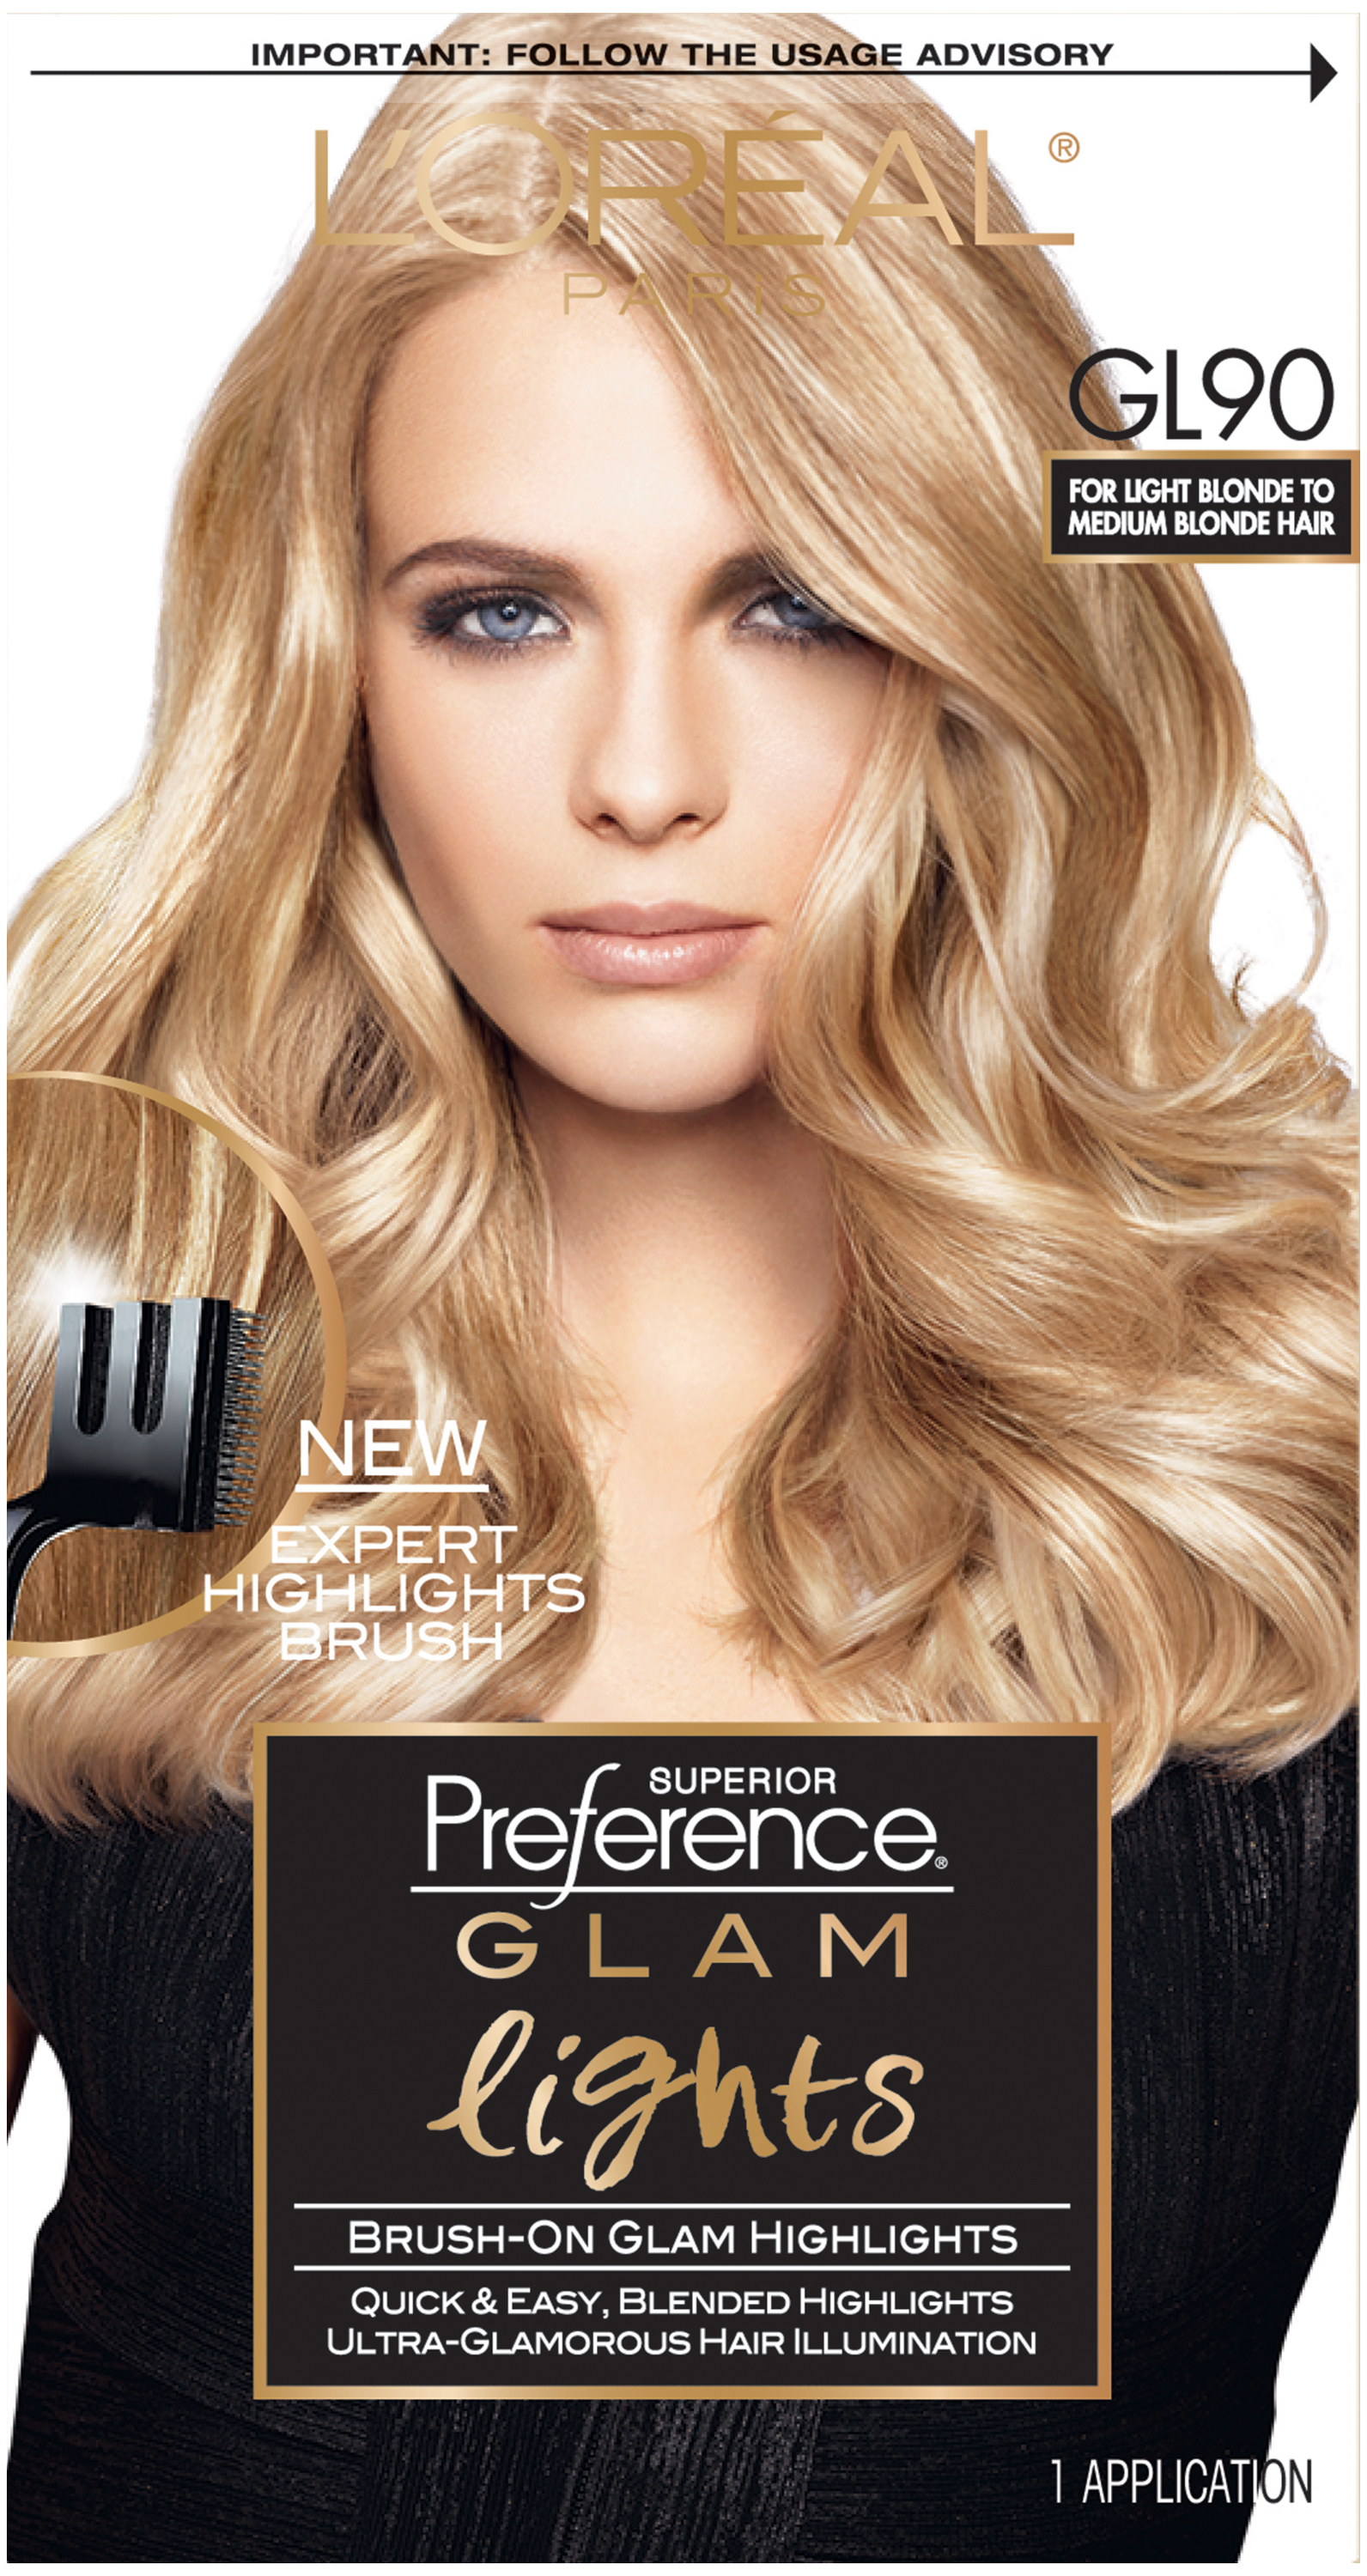 L'Oreal Superior Preference Glam Lights